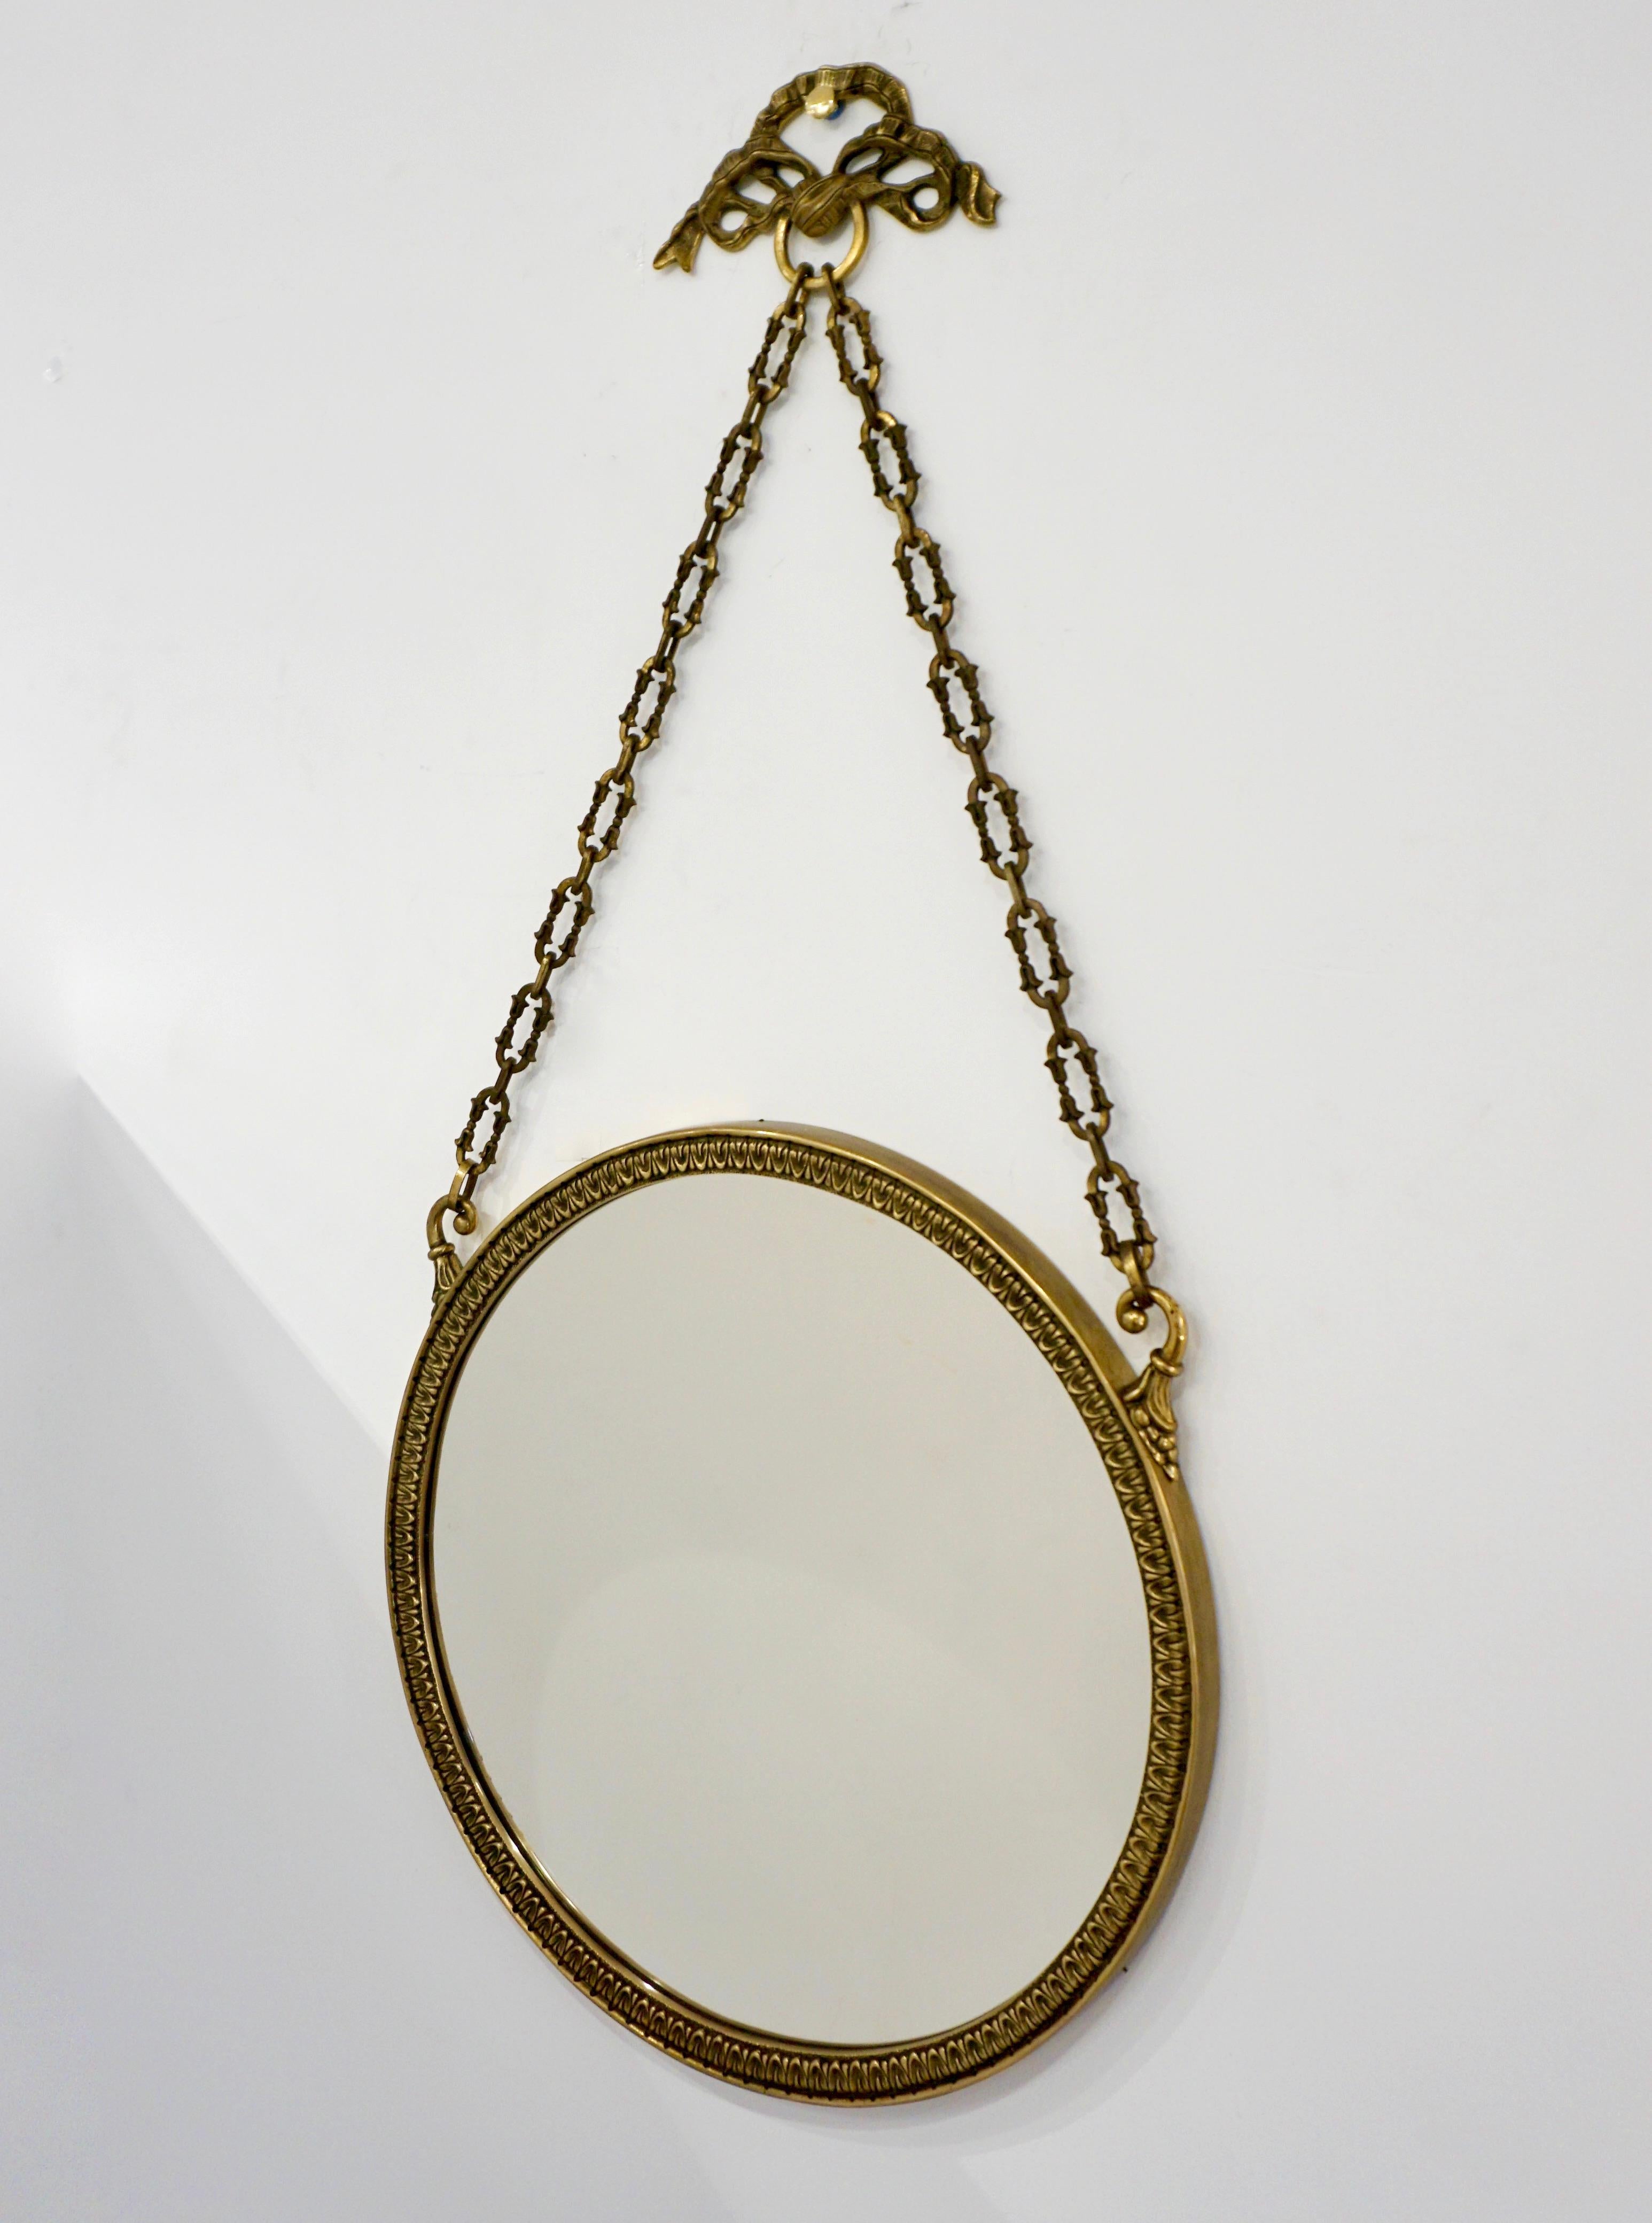 20th Century 1950s Vintage Italian Chain Hanging & Chased Bronze Round Mirror with Knot